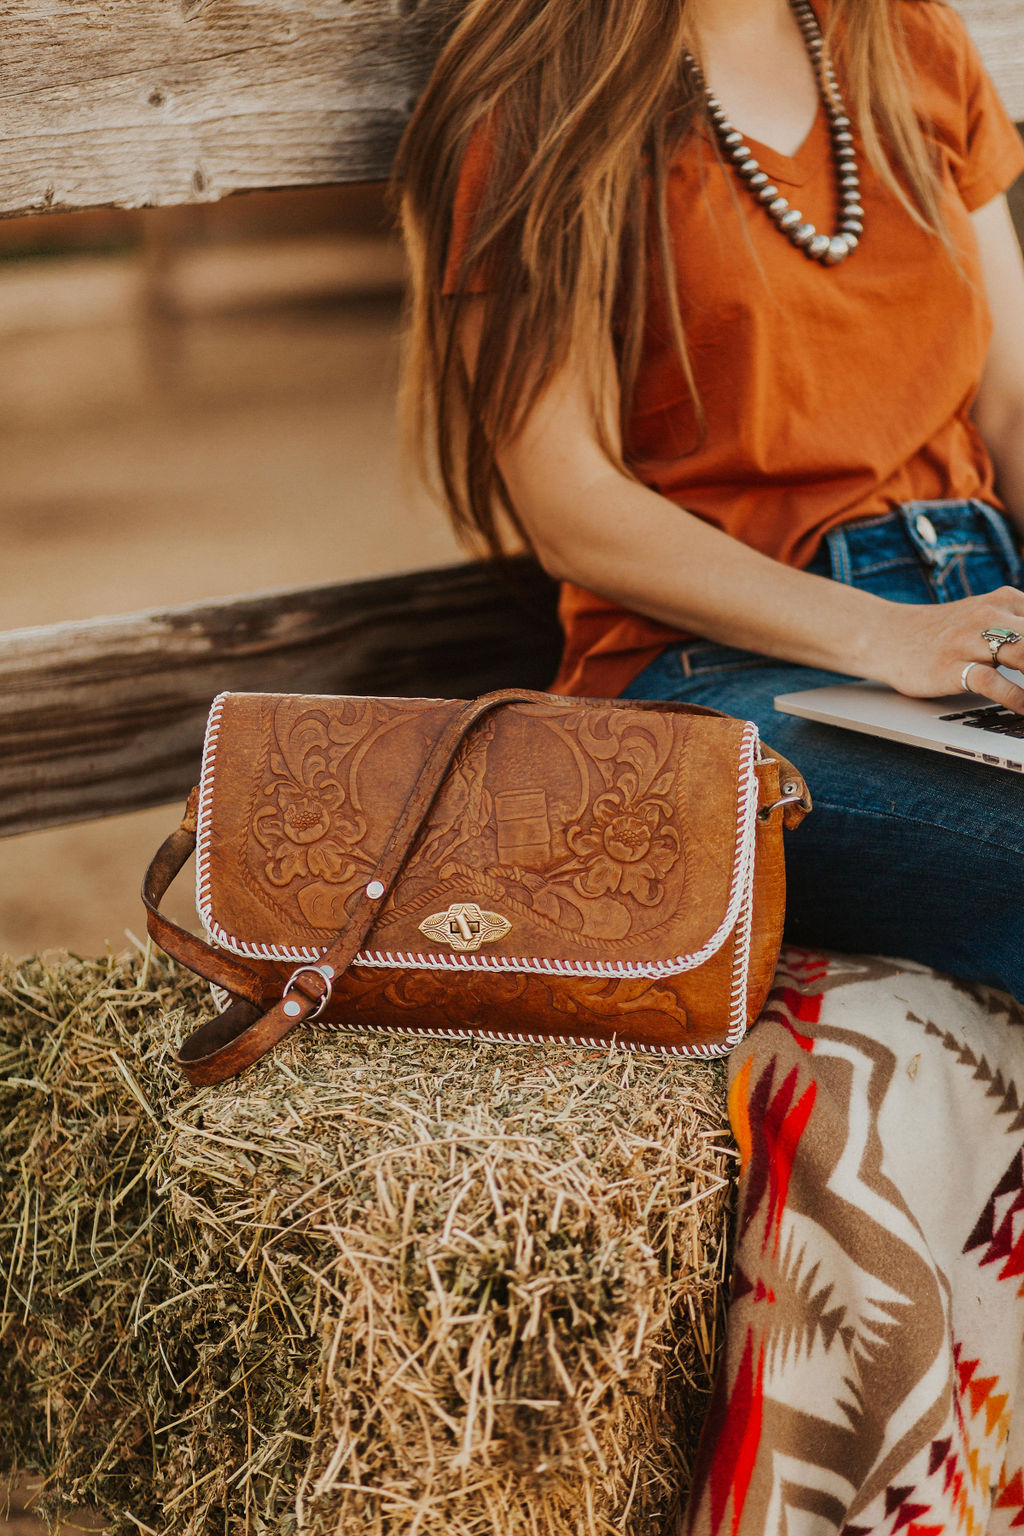 western vintage leather purse sitting on a haybale by a woman Christian business coach teaching lead generation strategies